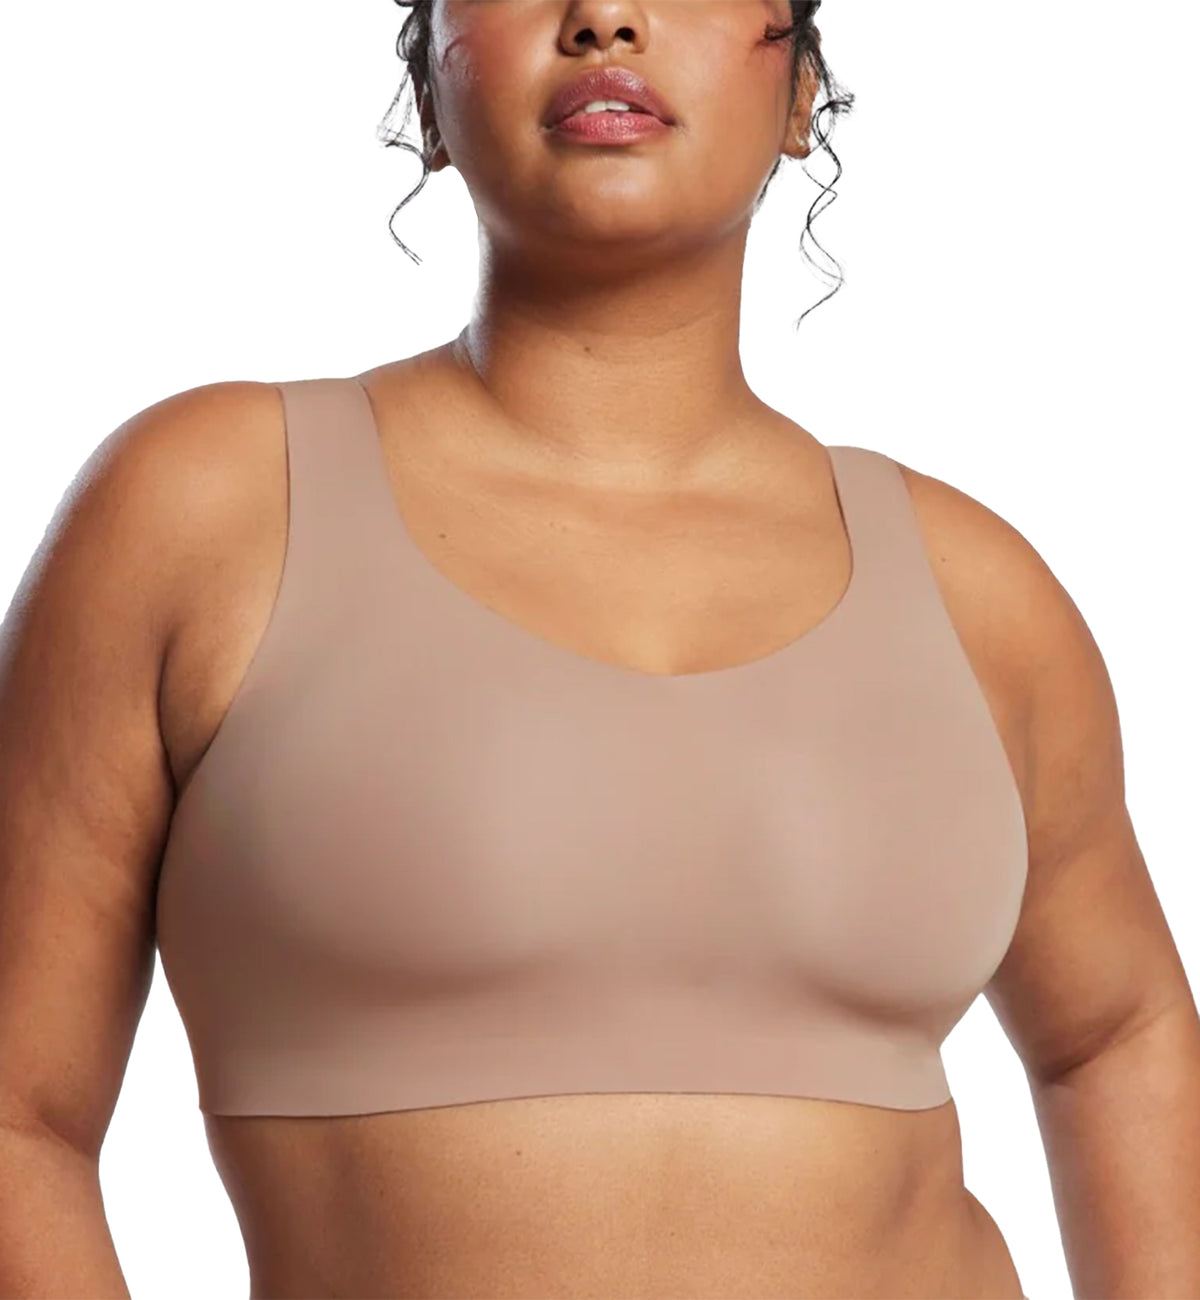 Evelyn &amp; Bobbie DEFY V-Neck Bralette w/ Removable Pads (1728﻿),Small,Willow - Willow,Small